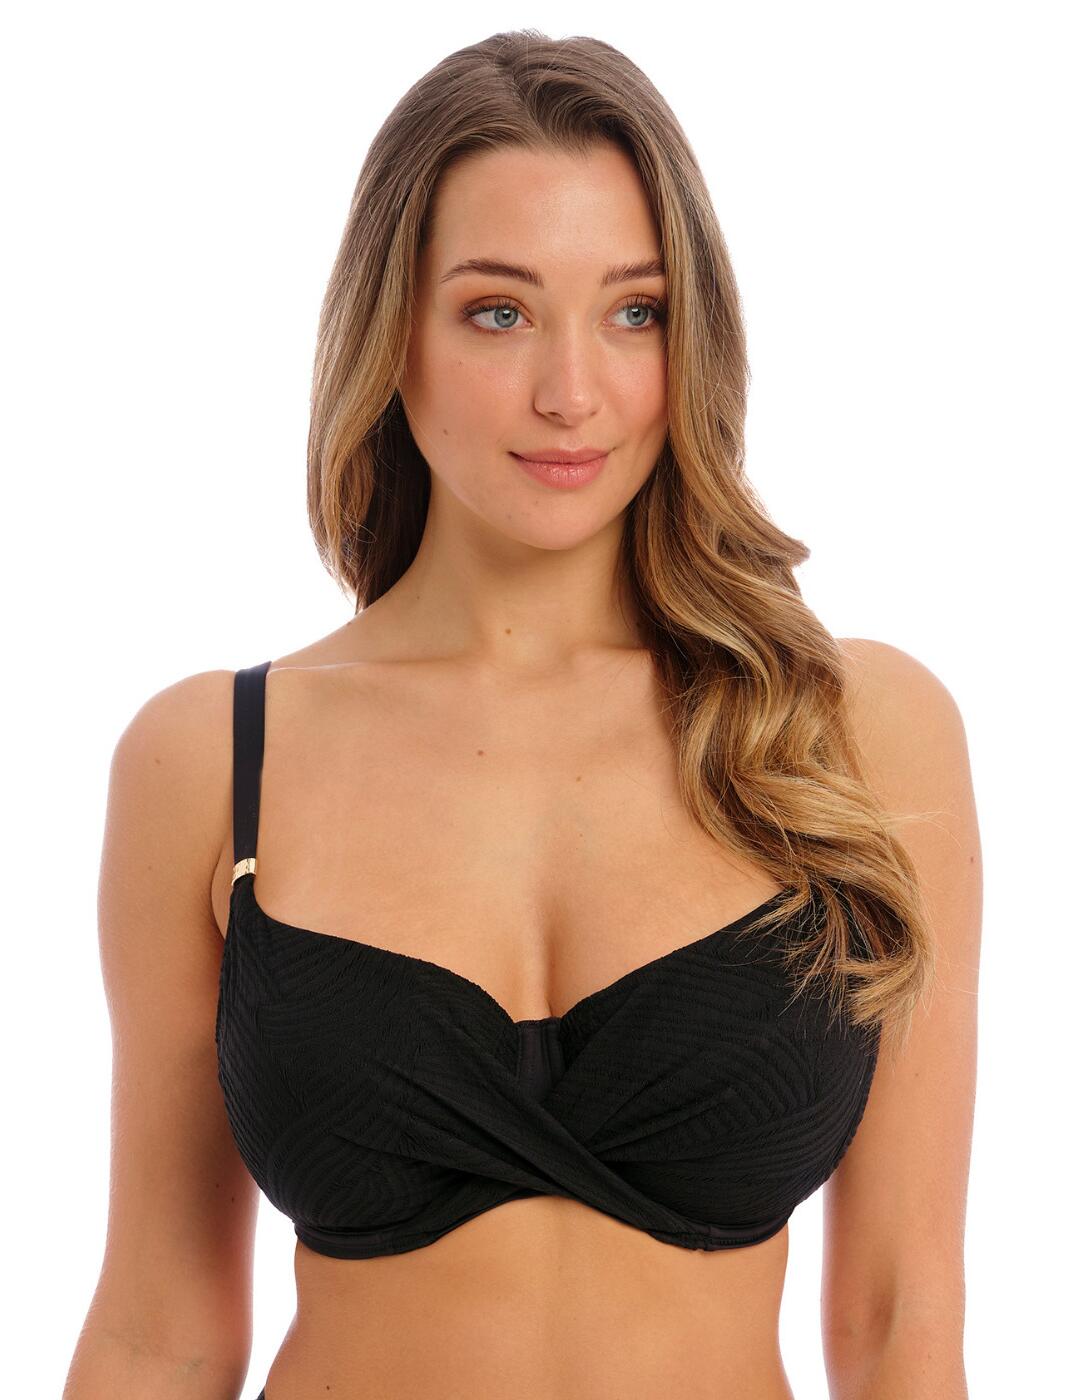  Fantasie Ottawa Wrap Front Full Cup Underwire Bikini (6355),34H,Ink  : Clothing, Shoes & Jewelry